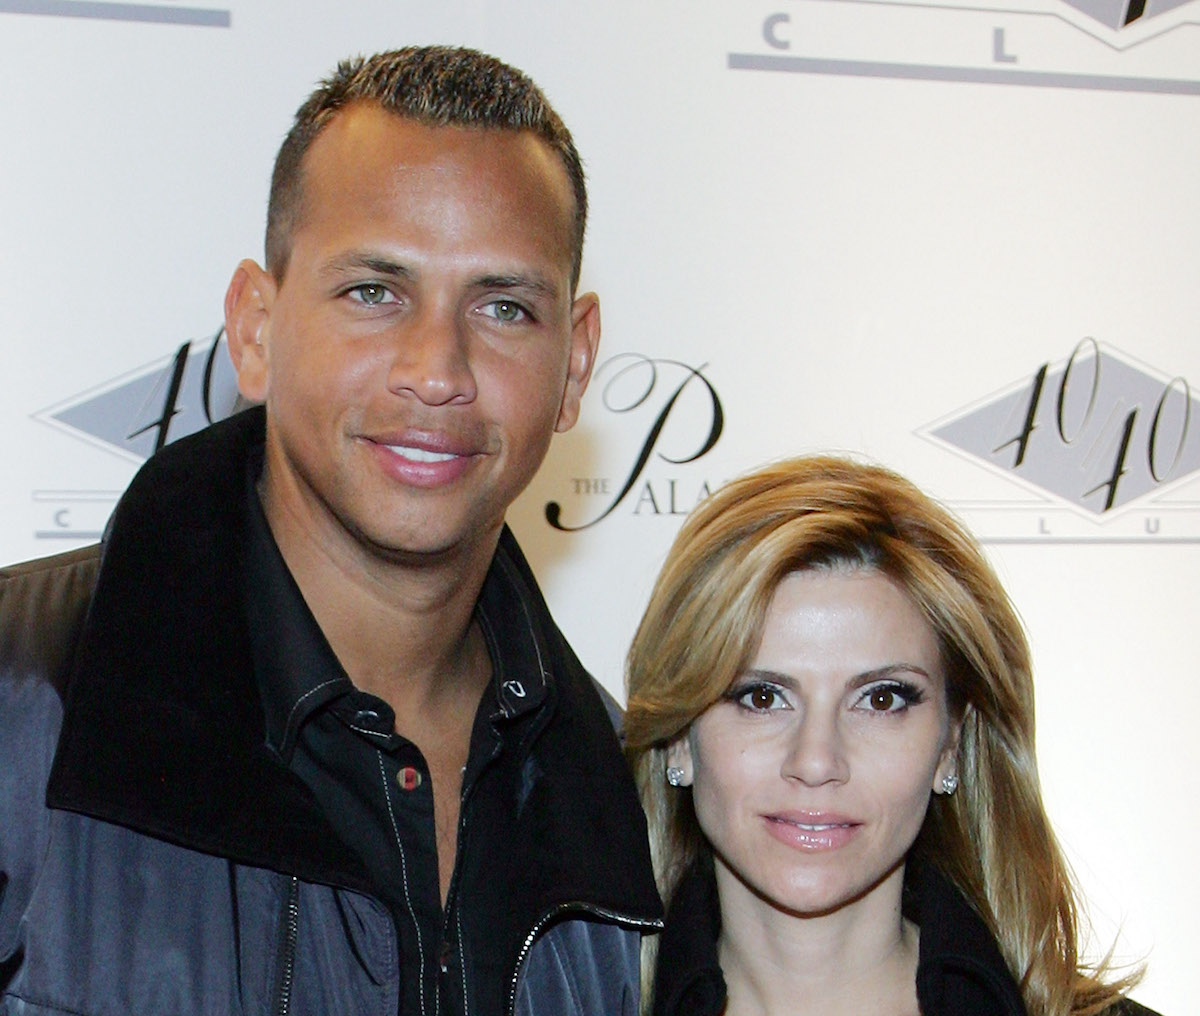 Alex Rodriguez (L) of the New York Yankees and his wife Cynthia Scurtis arrive at the opening of Jay-Z's USD 20 million 40/40 Club, a 24,000-square-foot sports bar and lounge at The Palazzo Resort-Hotel-Casino December 30, 2007 in Las Vegas, Nevada | Ethan Miller/Getty Images